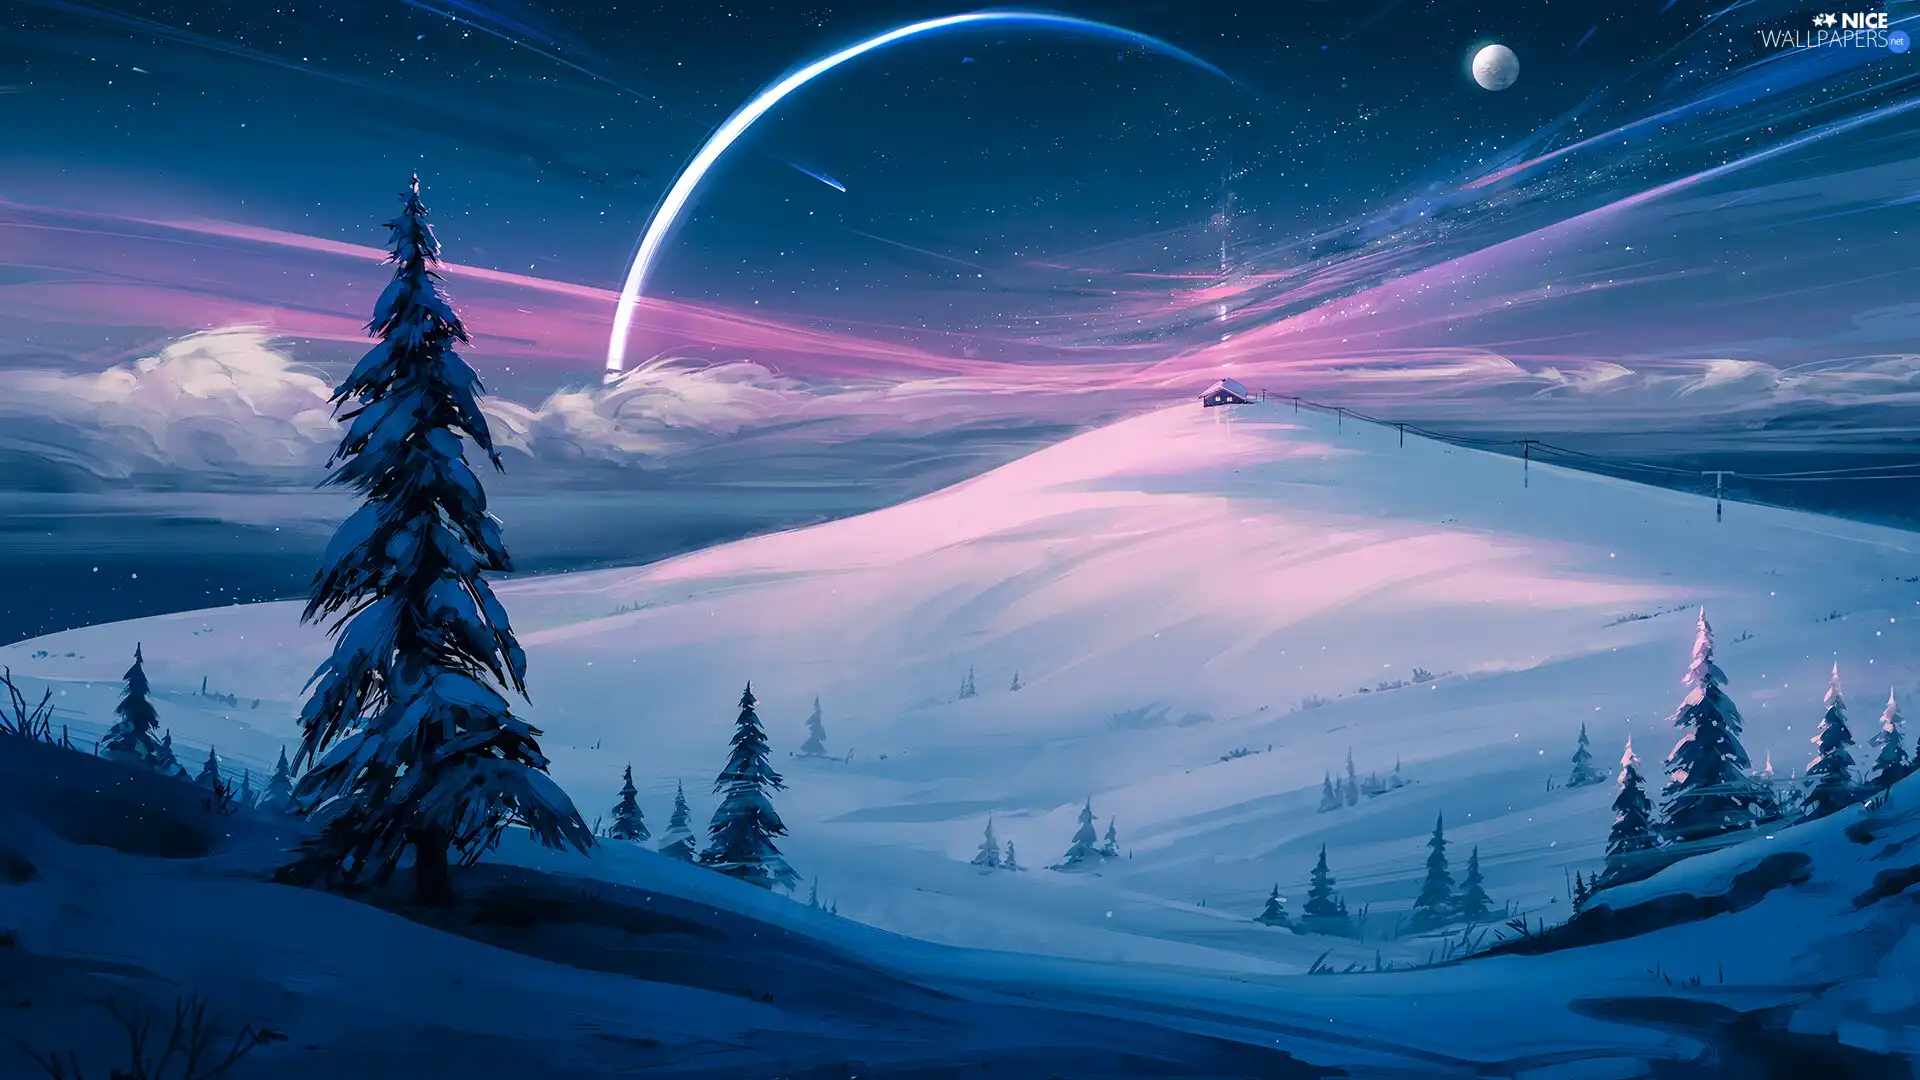 moon, winter, house, Mountains, graphics, Spruces, Sky